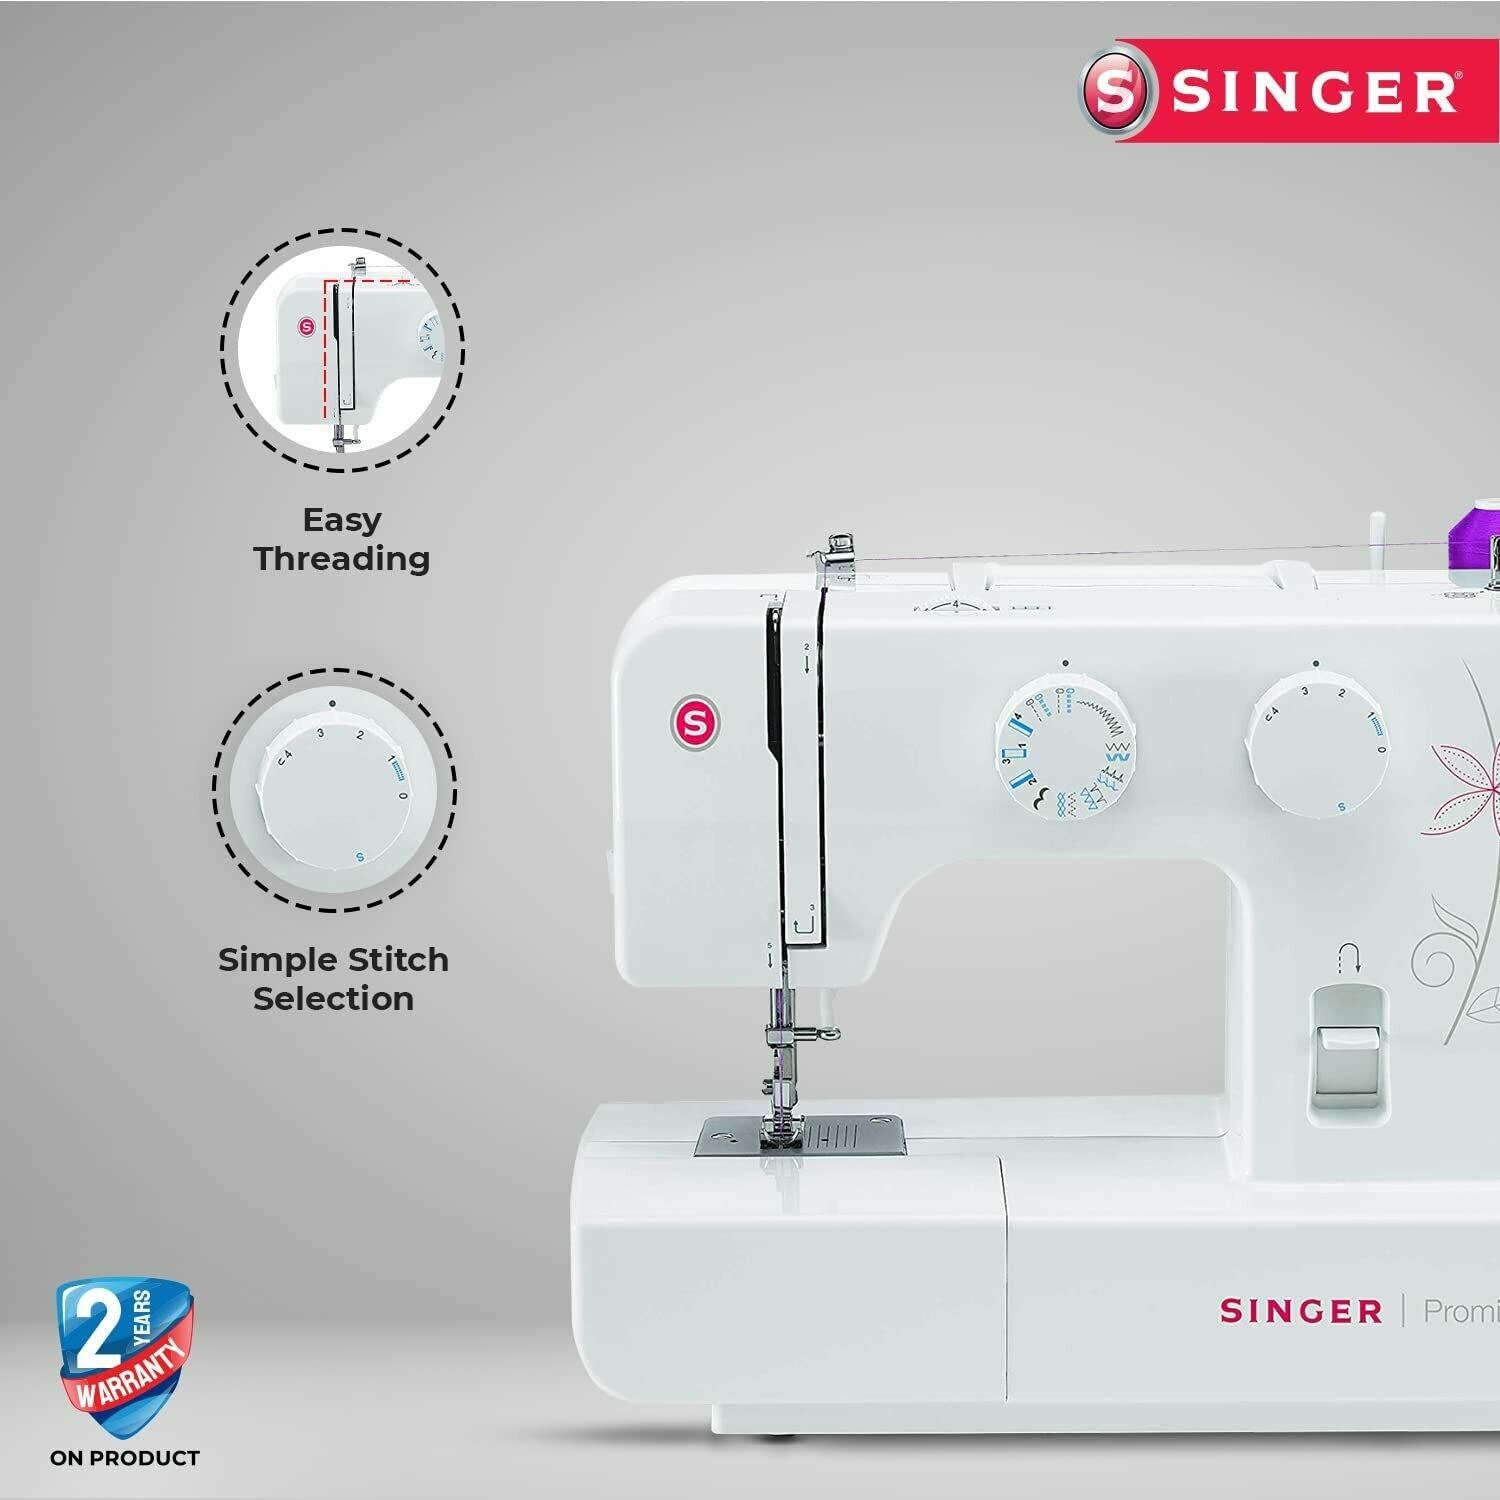 sing rape pitcher Singer Promise FM 1412 Automatic Zig-Zag Electric Sewing Machine (Built-in  Stitches 12, White) - JioMart